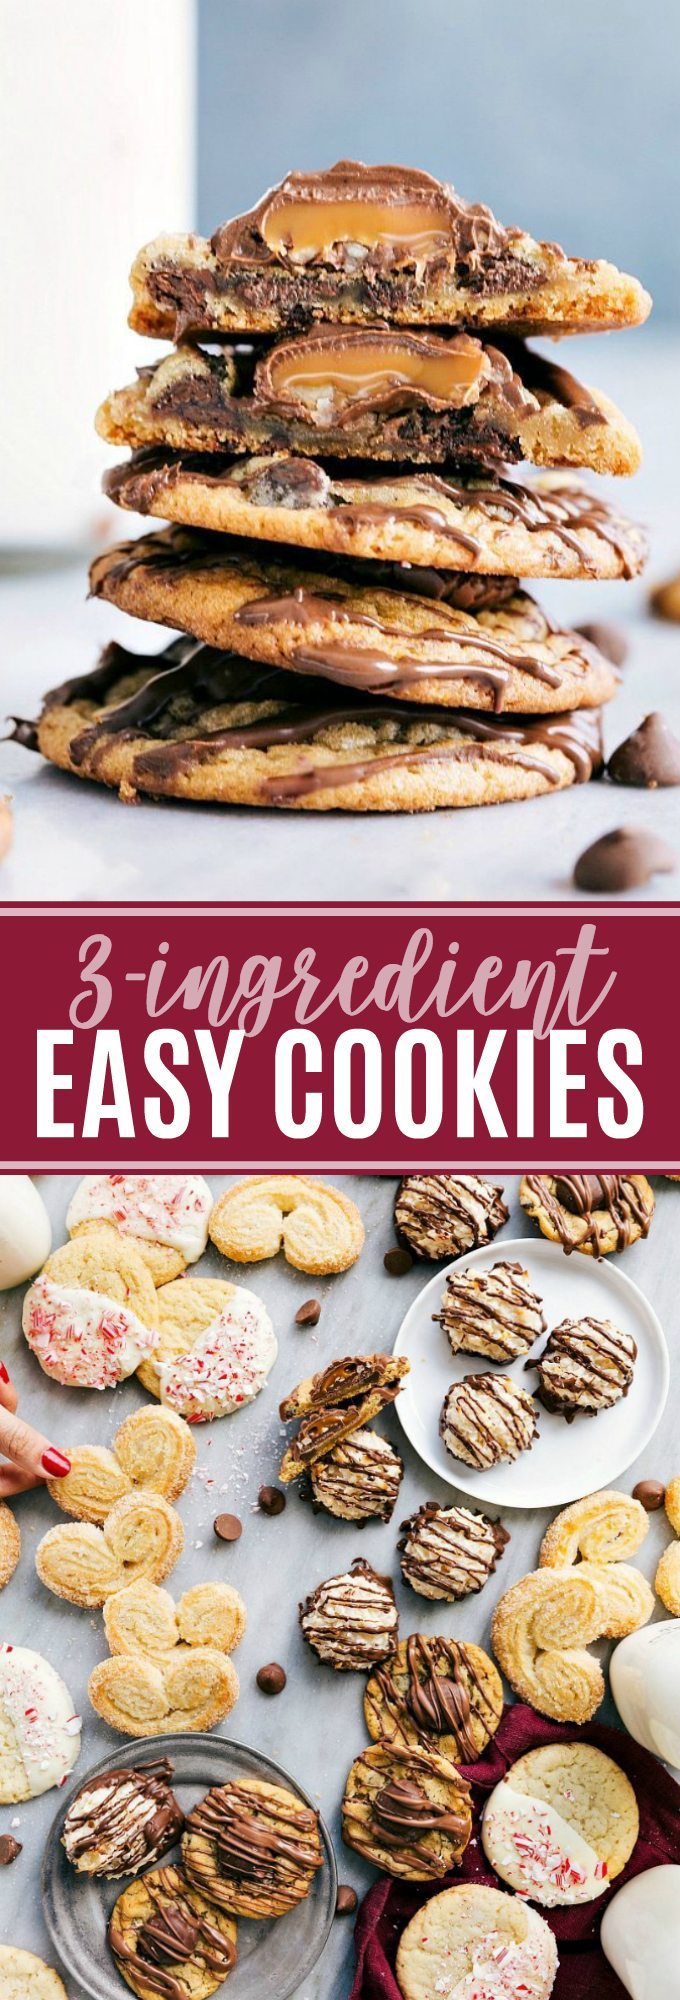 The ultimate BEST EVER 3-ingredient COOKIES!! These easy cookies are so delicious and everyone goes crazy over them! Turtle cookies, palmiers, chocolate-covered macaroons, and white chocolate peppermint sugar cookies via chelseasmessyapron.com | #christmas #cookie #dessert #three #3 #ingredient #ingredients #family #friendly #easy #quick #turtle #sugar #sugarcookie #peppermint #palmiers #desserts